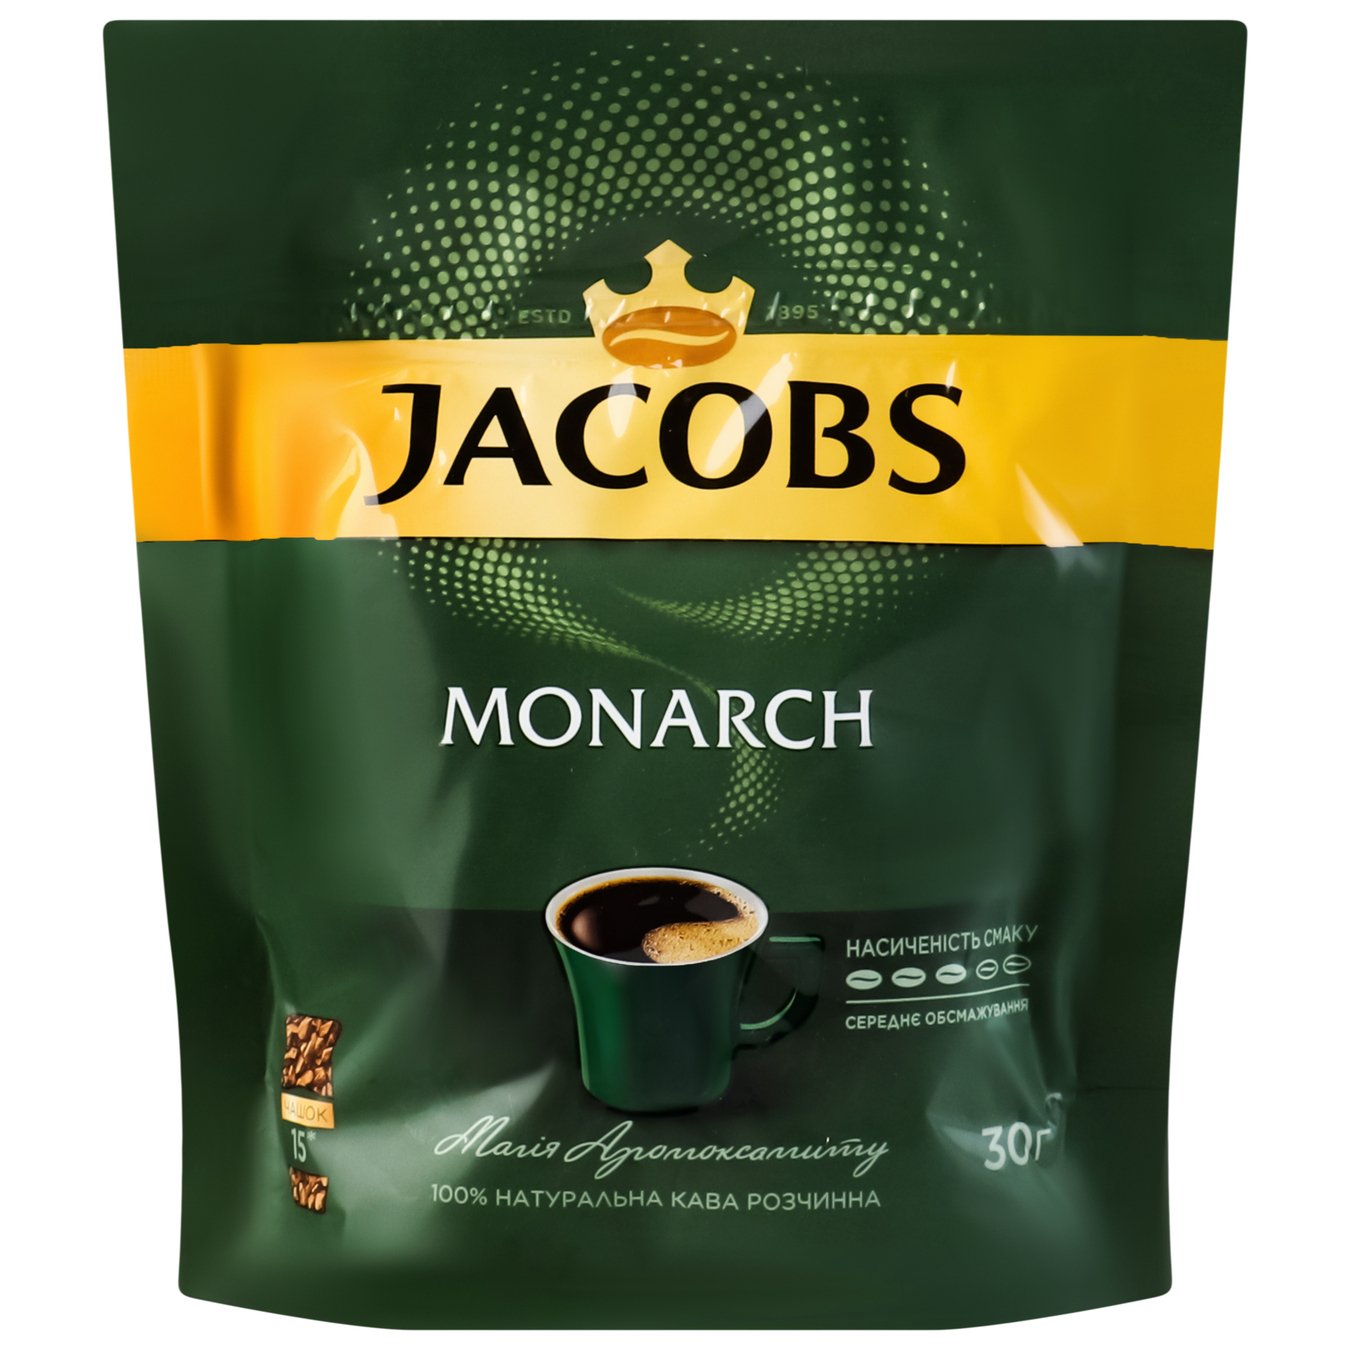 Jacobs Monarch instant coffee 30g